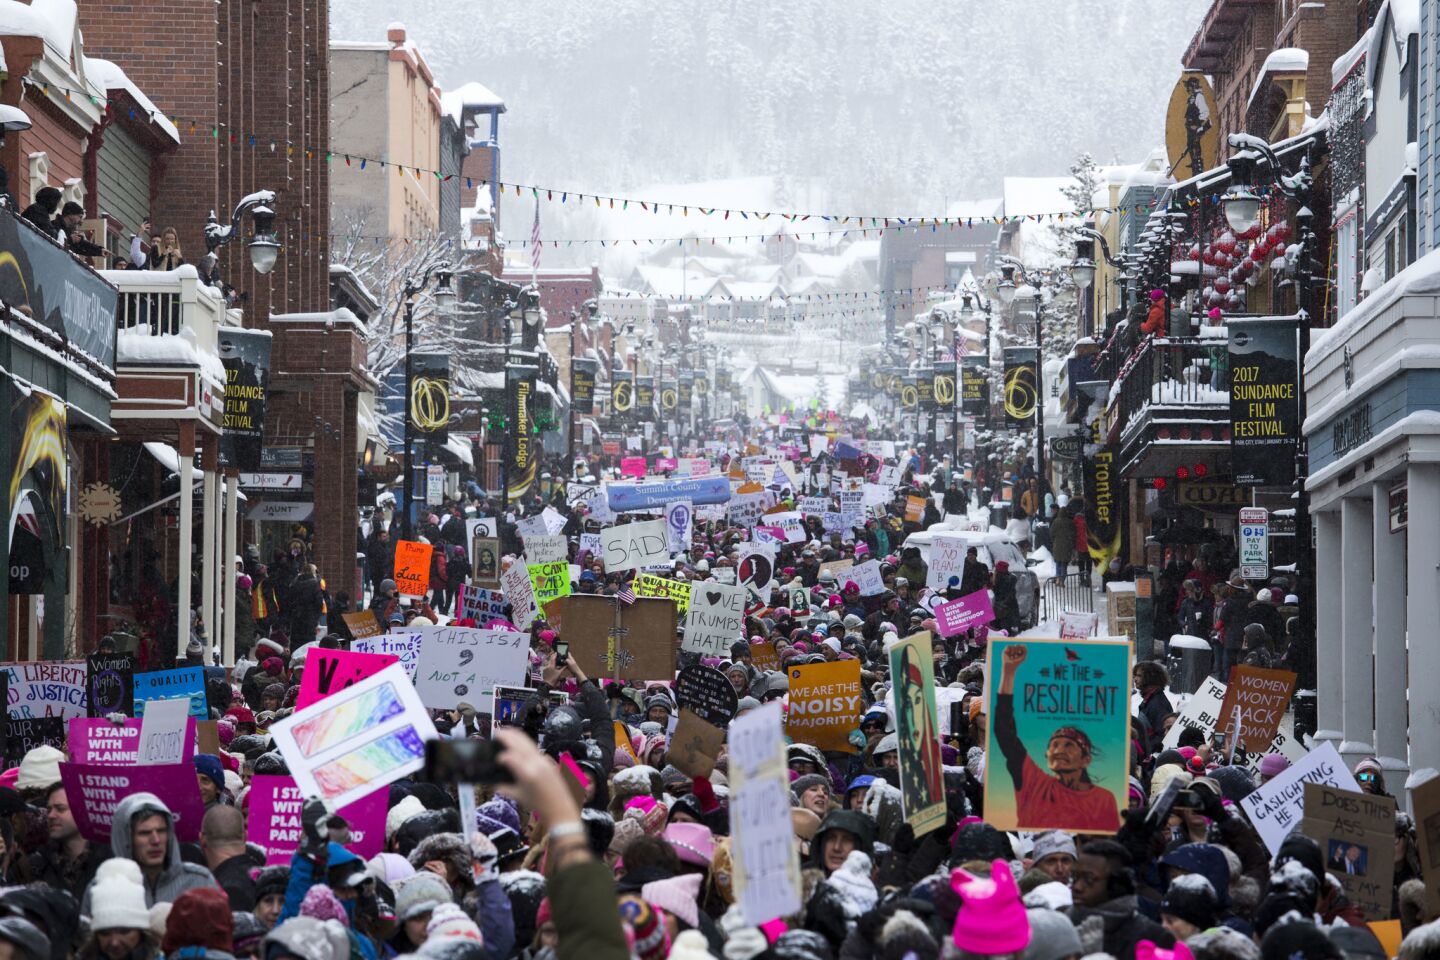 Main St. in Park City was filled with people taking part in a march for women's rights at the Sundance film festival.